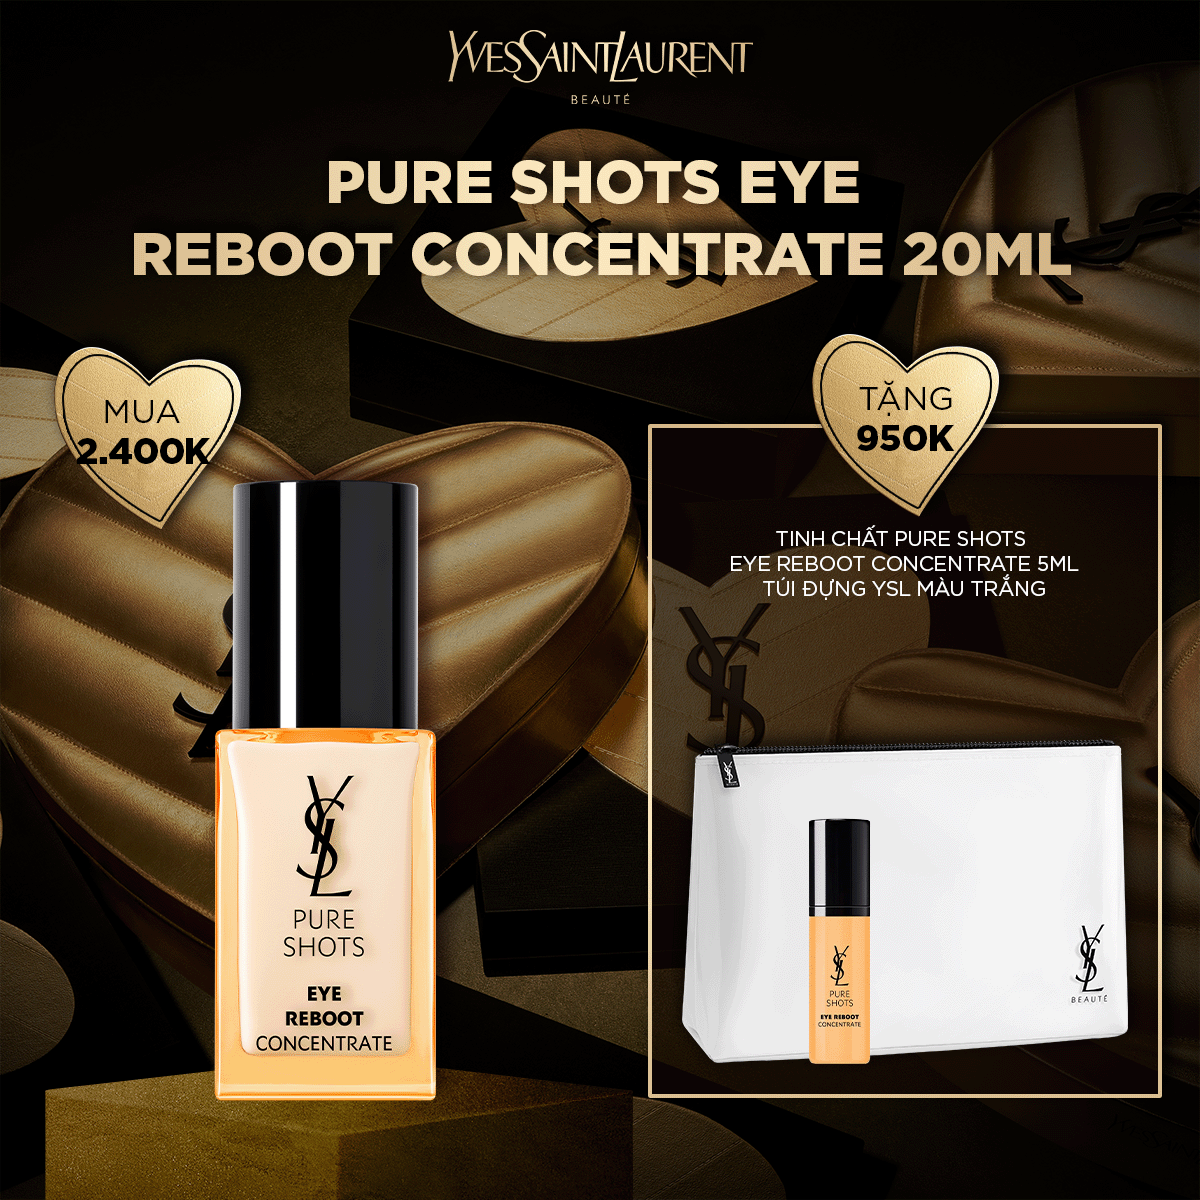 [FEB] Pure Shots Eye Reboot Concentrate 20ml